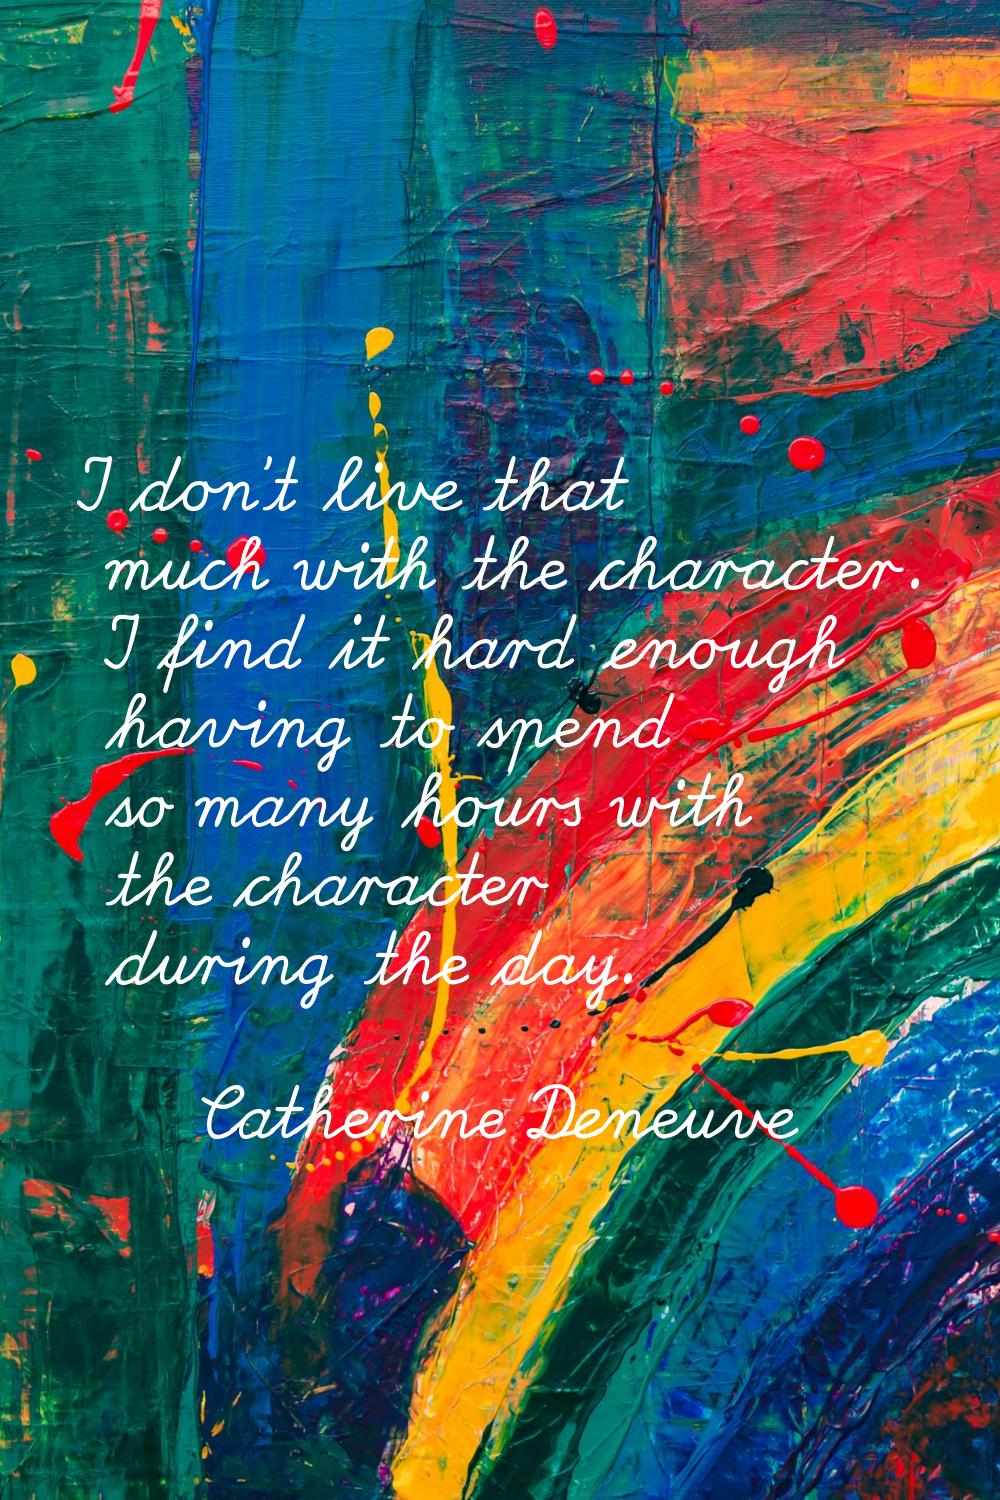 I don't live that much with the character. I find it hard enough having to spend so many hours with